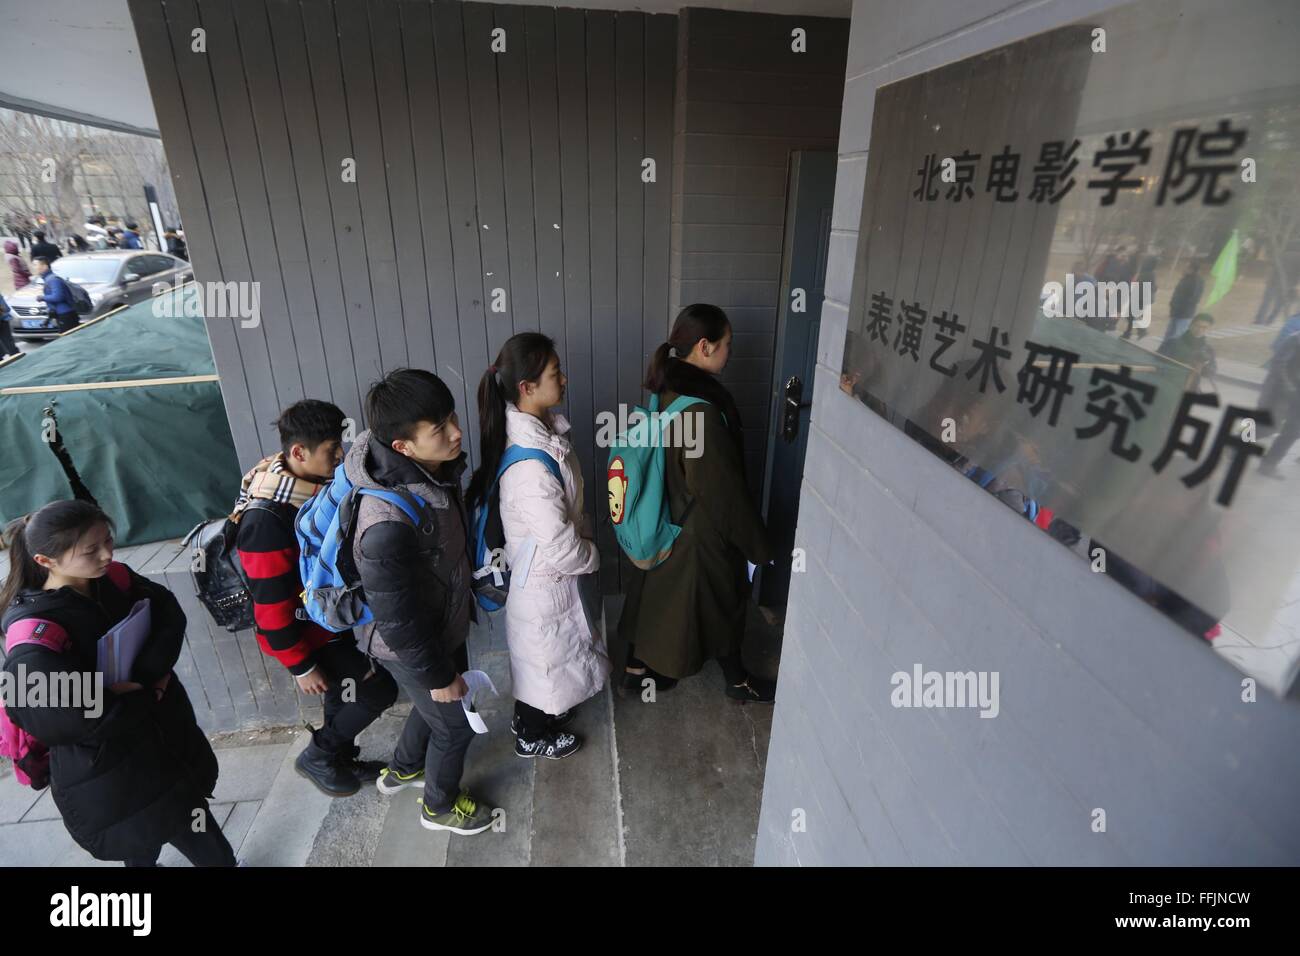 Beijing, China. 15th Feb, 2016. Candidates queue to enter the examination hall at Beijing Film Academy (BFA) in Beijing, capital of China, Feb. 15, 2016.The annual entrance exam of China's art colleges including BFA, the Central Academy of Drama and the Communication University of China started simultaneously on Monday. Over 7,600 applicants for BFA's performance institute will take part in the exam to vie for 45 vacancies in the institute. Some Chinese young people regarded studying in an art college as a shortcut to become famous in recent years. © Shen Bohan/Xinhua/Alamy Live News Stock Photo